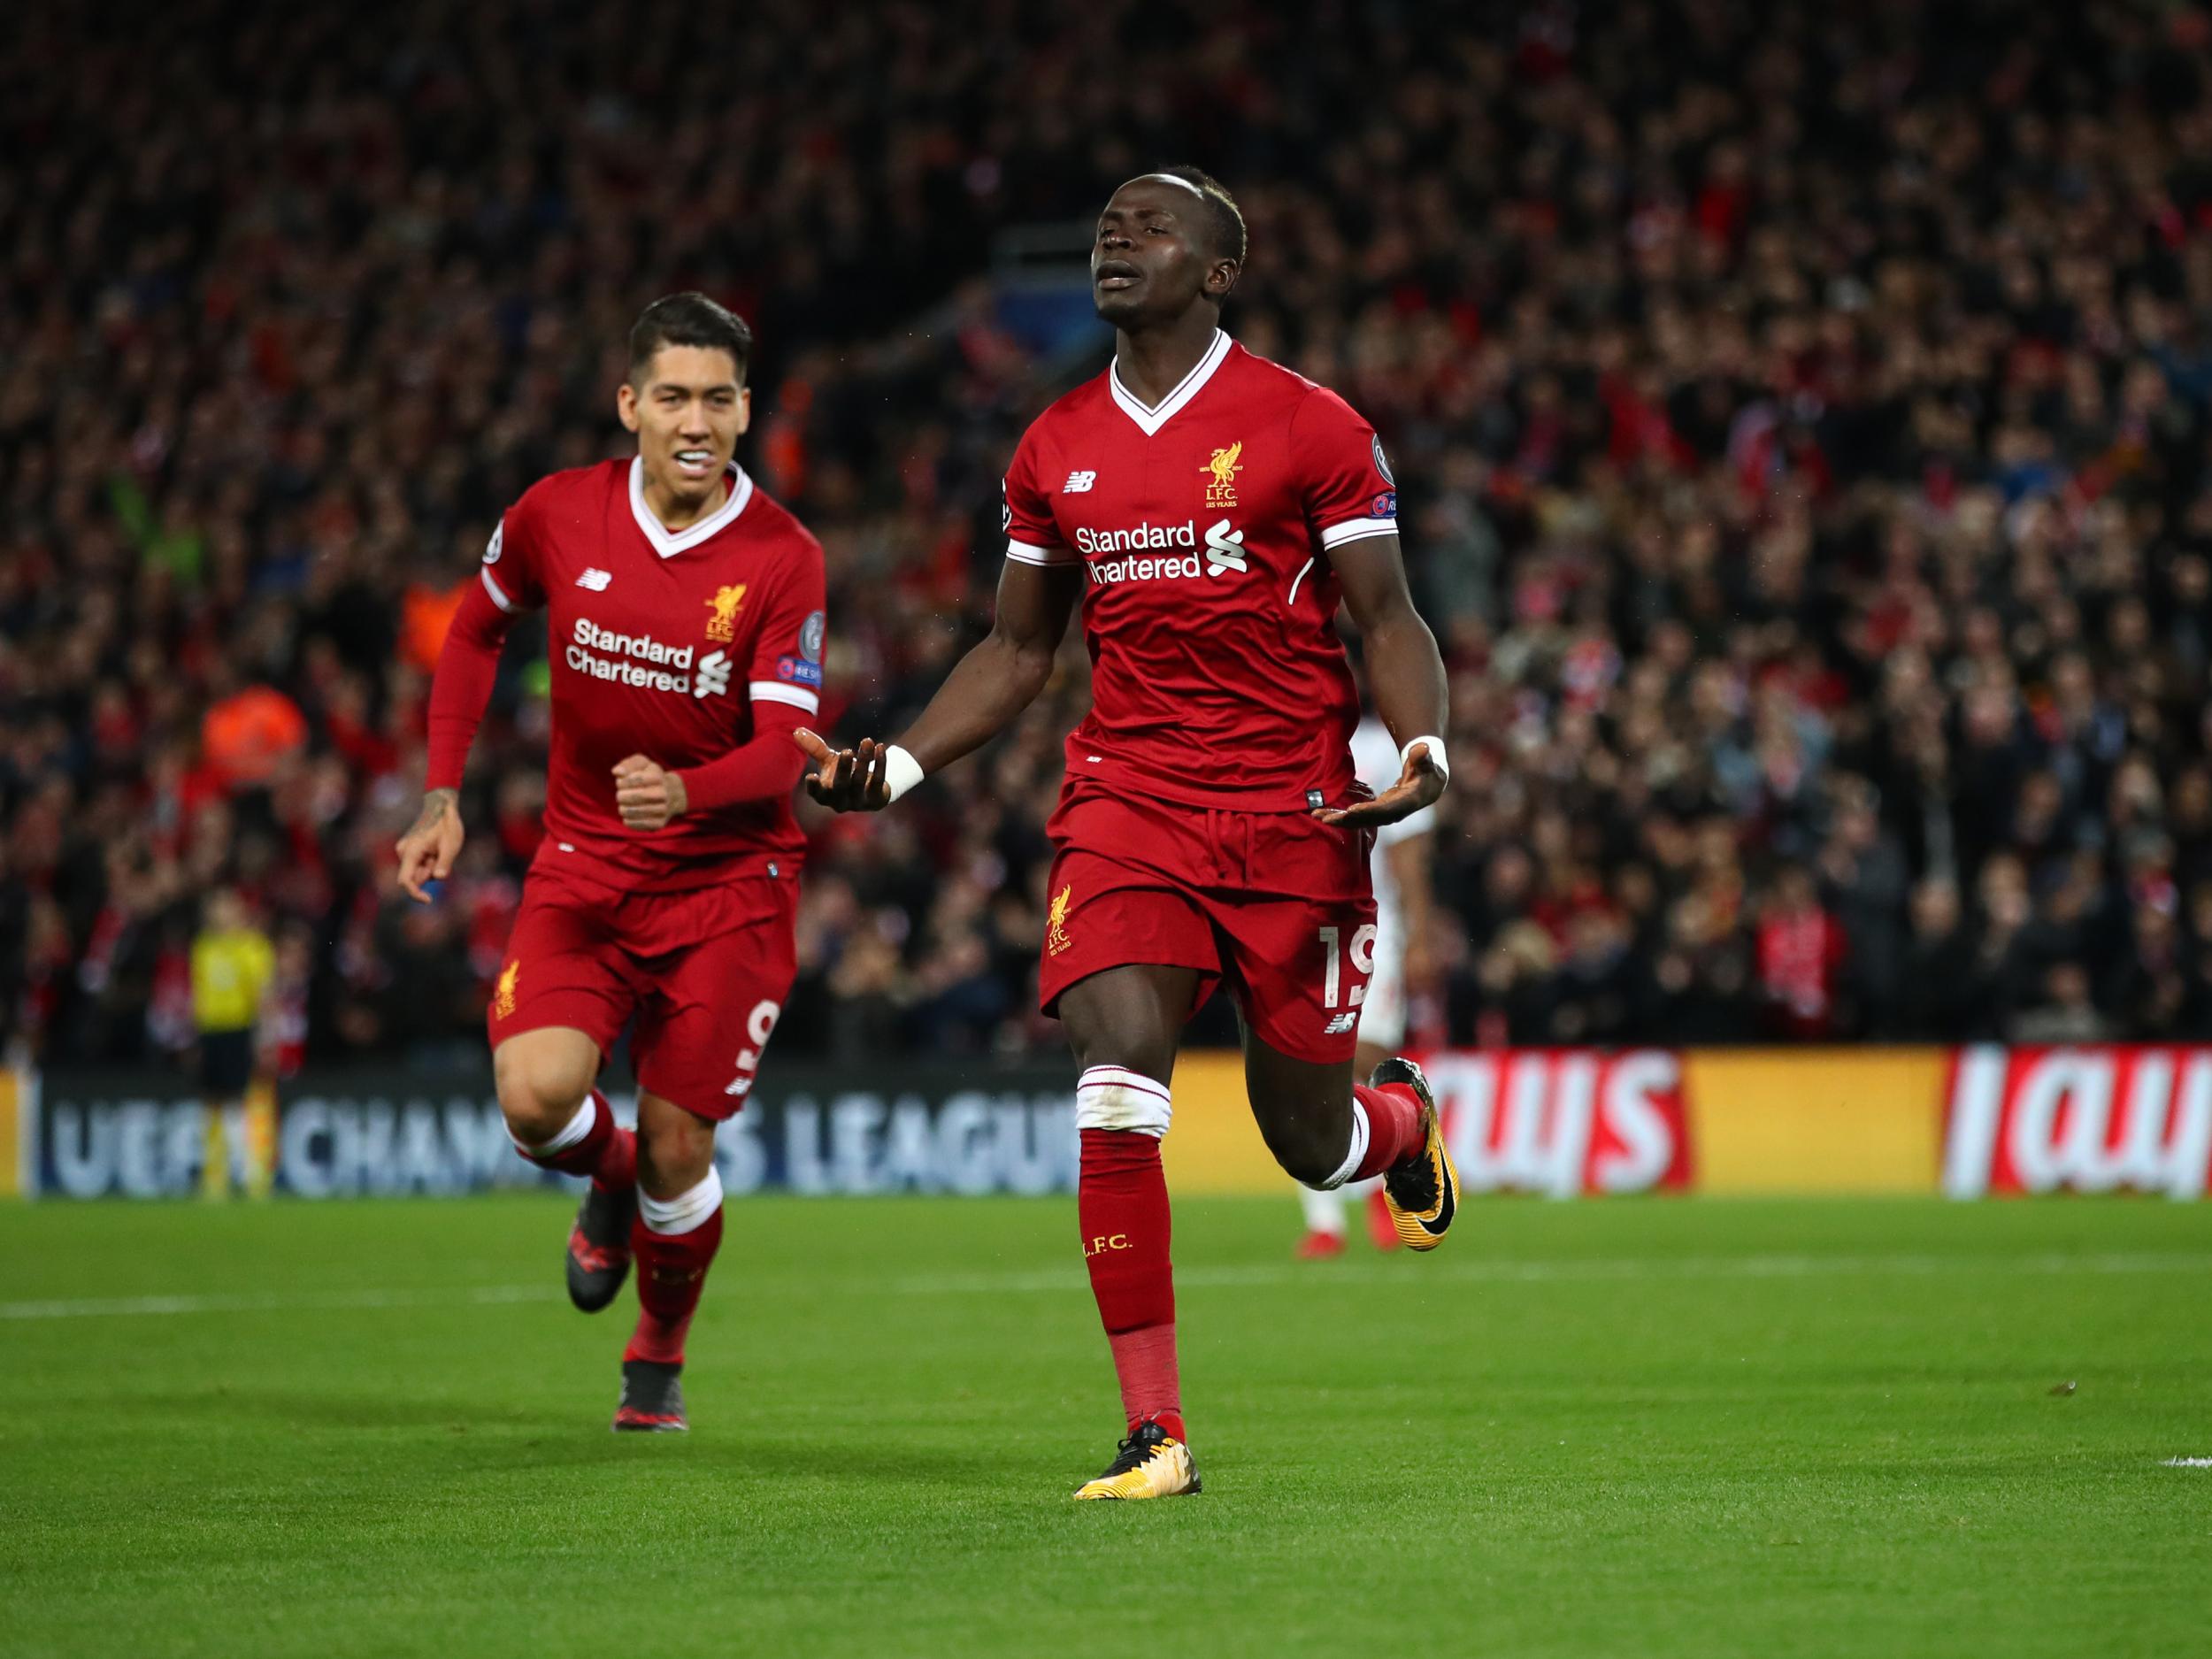 Mane added two goals to his tally for the season